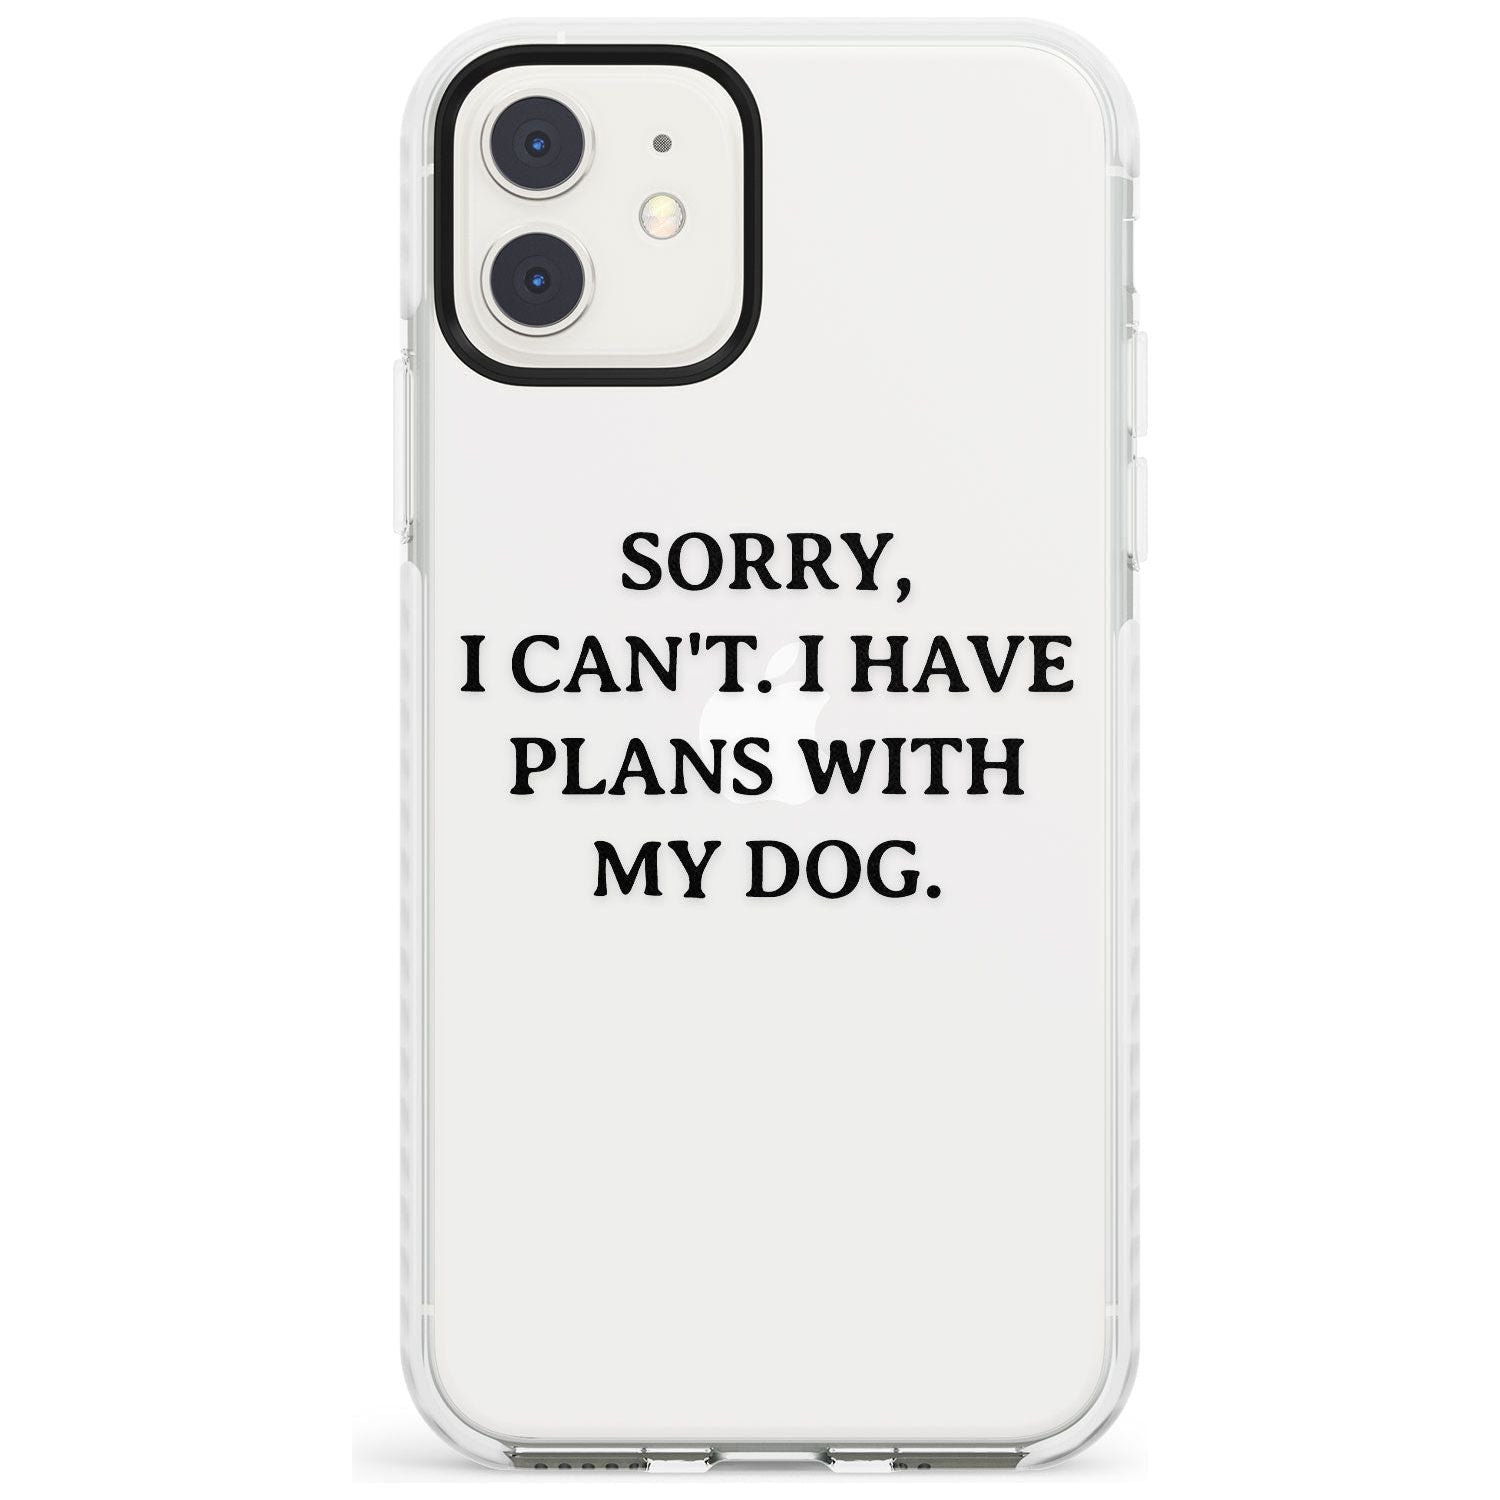 Plans with Dog Impact Phone Case for iPhone 11